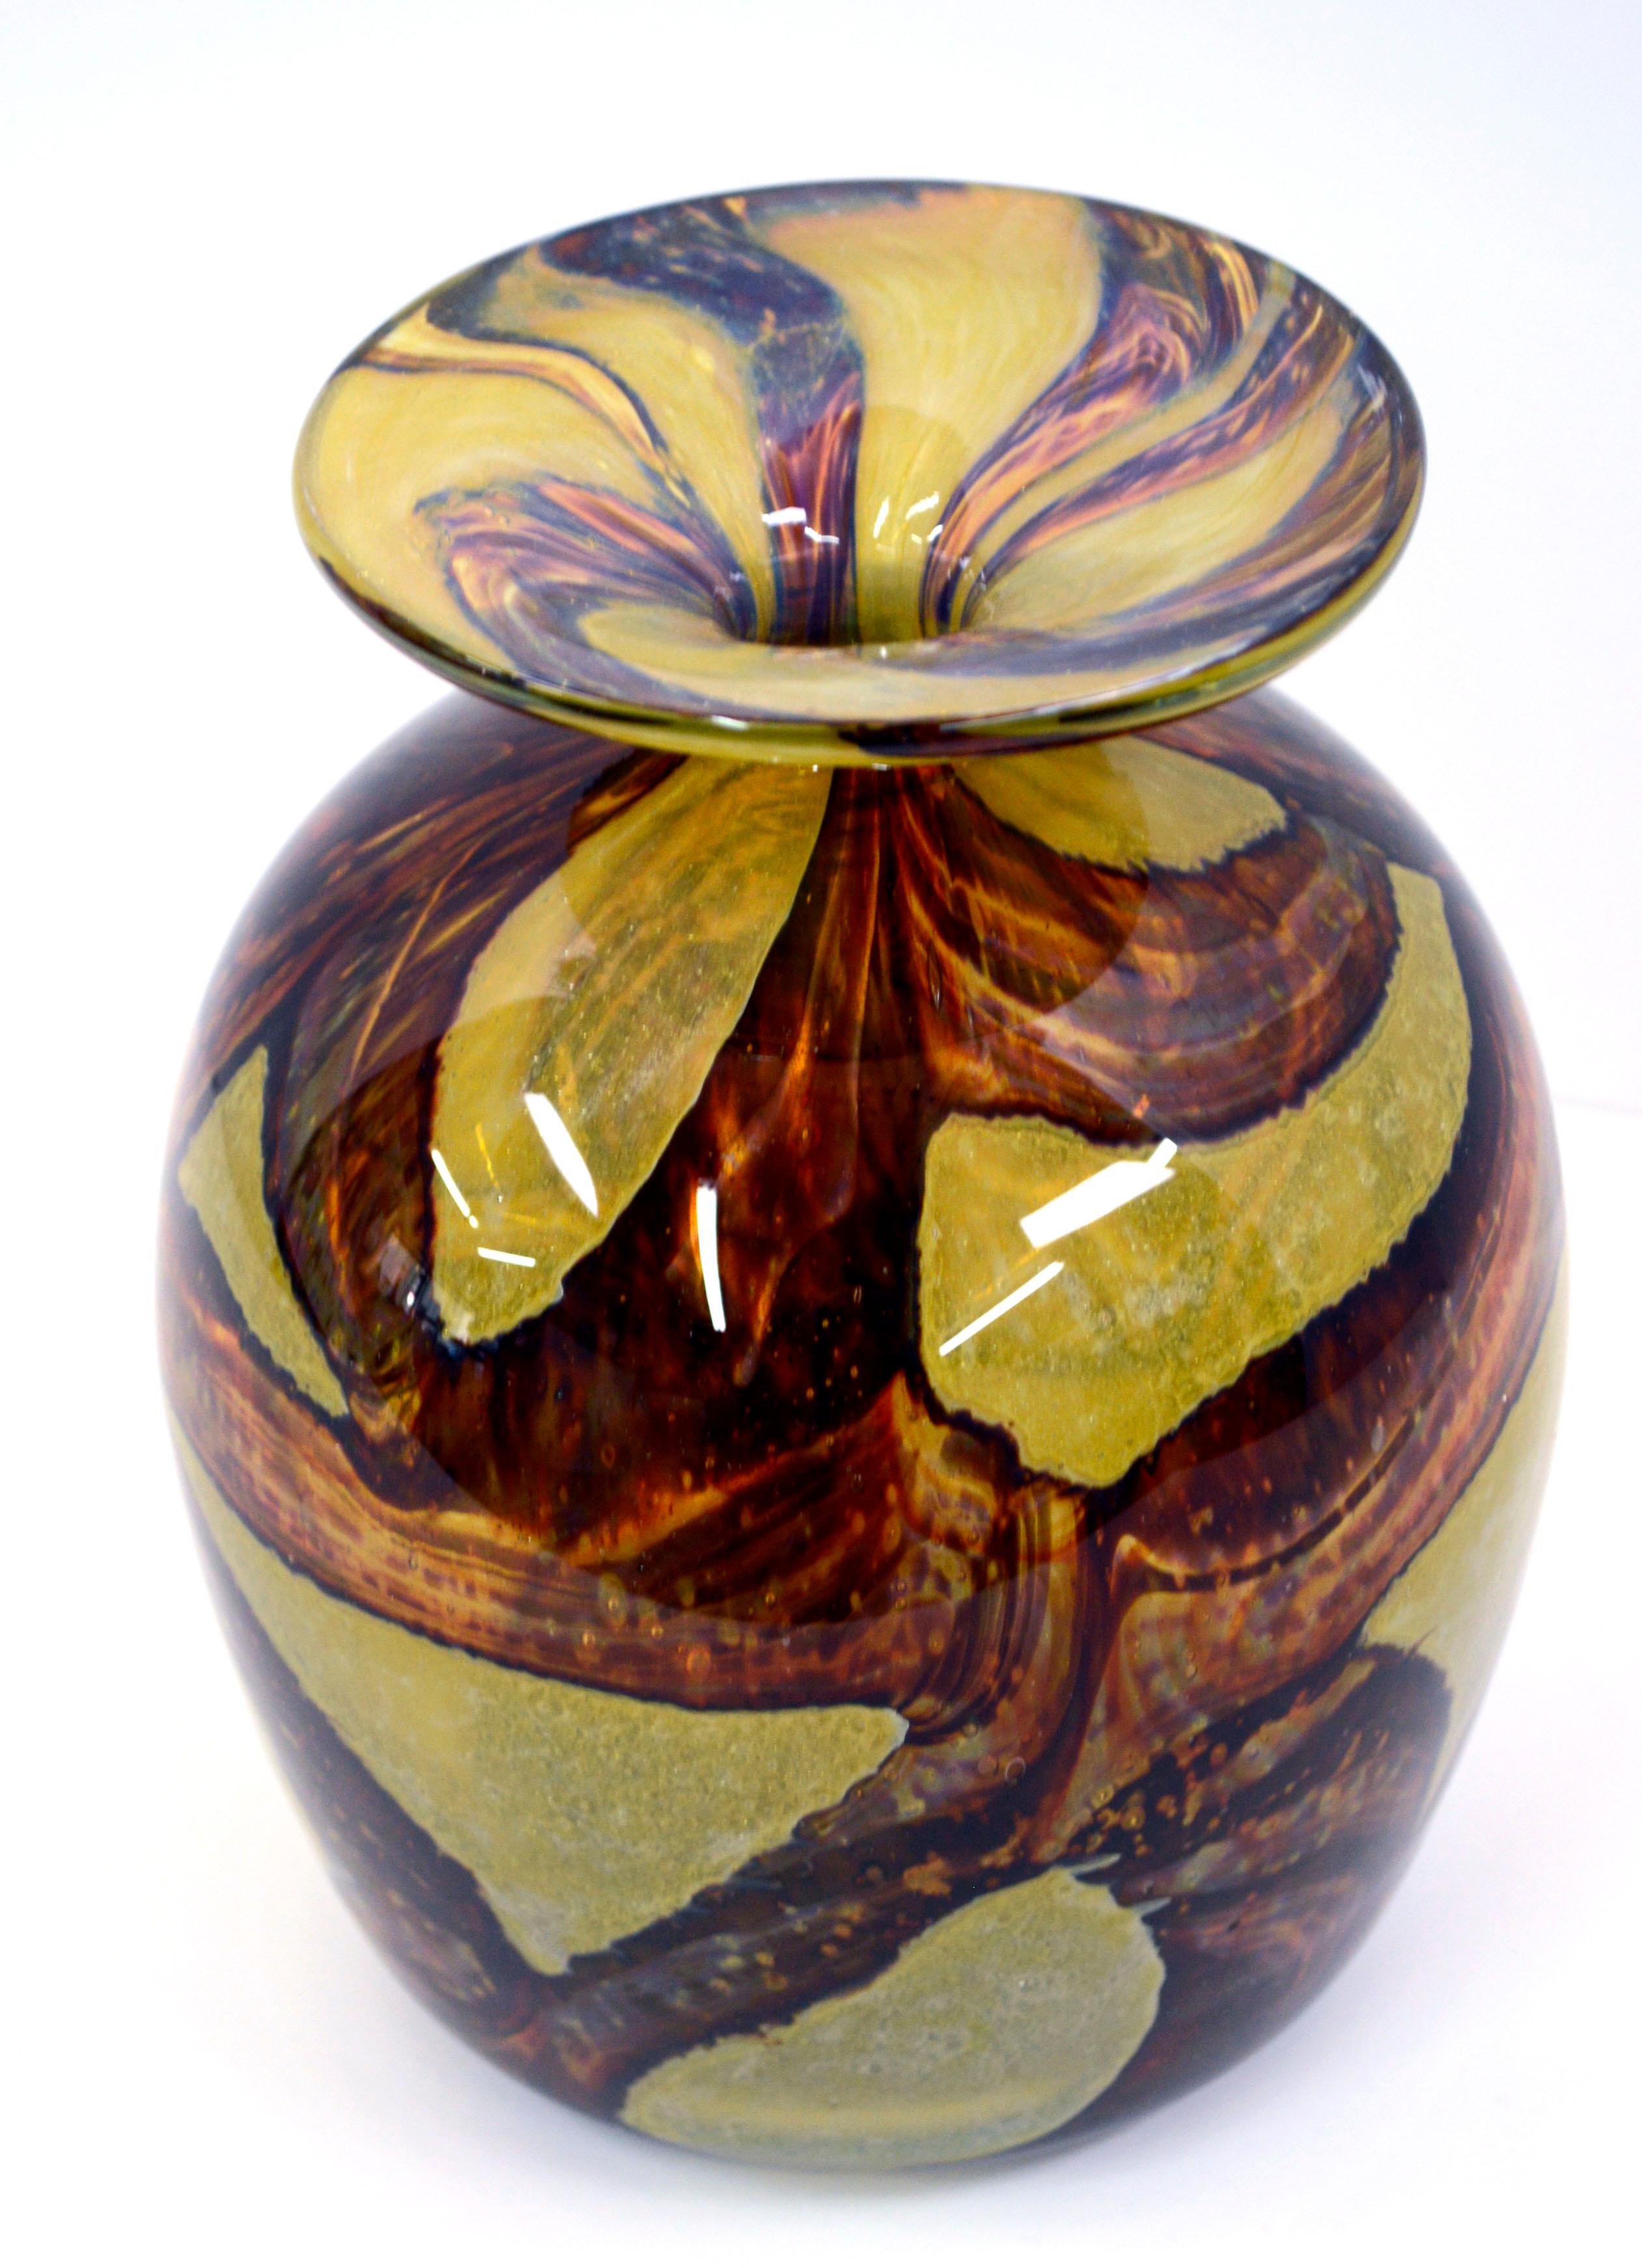 Chartreuse & brown earth tones organically flow together in this signed Mdina (Maltese, 1968-present) glass vase from the island of Malta, c.1970's. Signed 